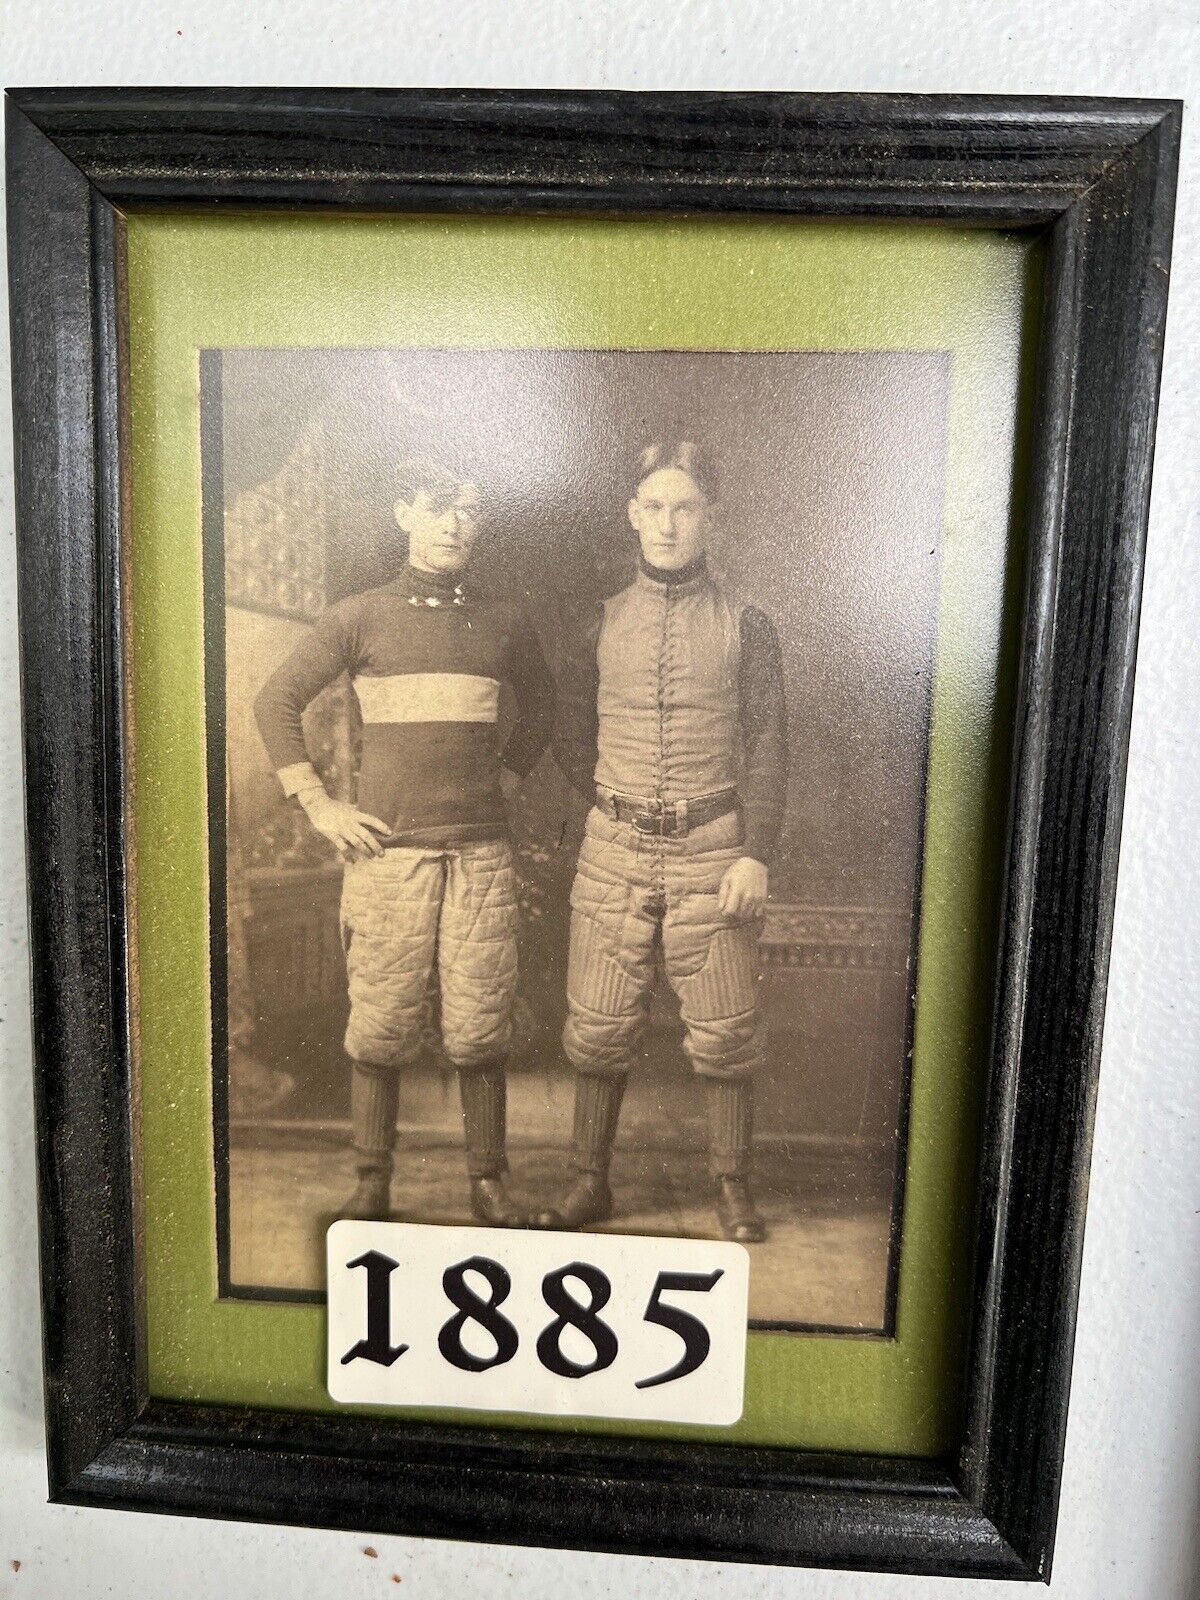 Vintage 1885 Football Framed Photograph Brothers Teammates In Gear Pads